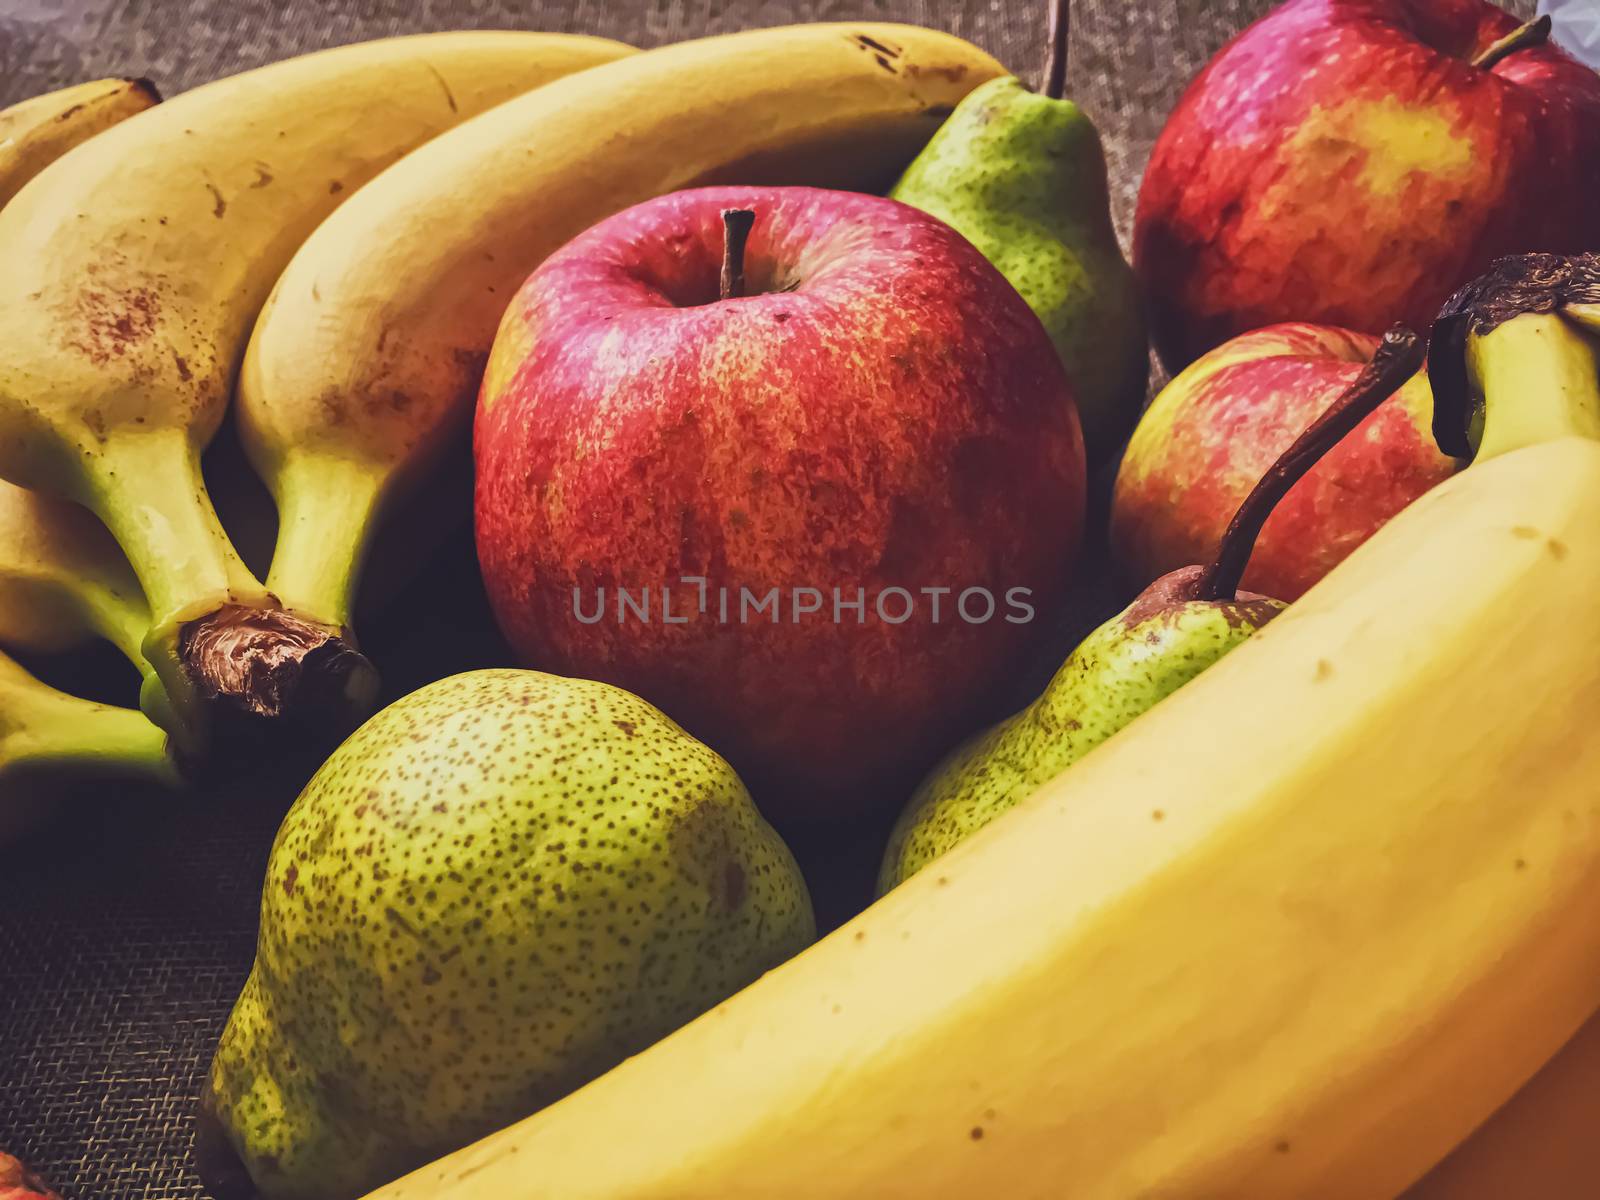 Organic apples, pears and bananas on rustic linen background, fruits farming and agriculture